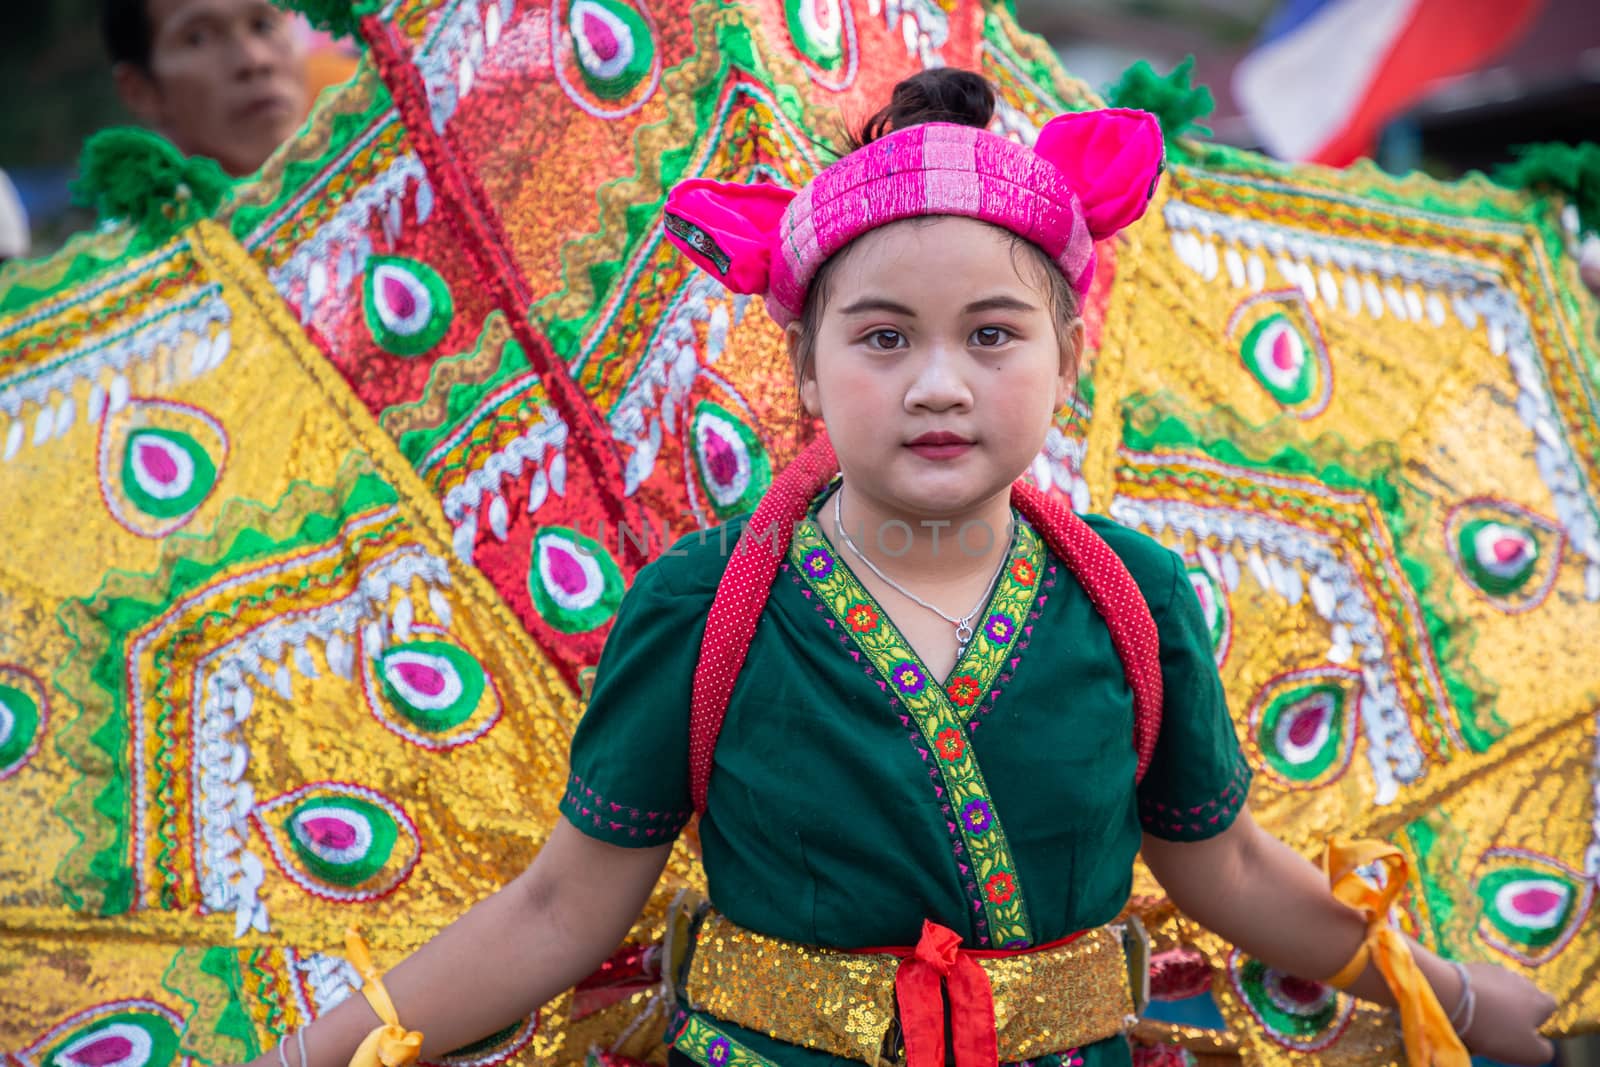 Thoet Thai, Chiang Rai - THAILAND, November 27, 2019 : Cute girl of Shan or Tai Yai (ethnic group living in parts of Myanmar and Thailand) in tribal dress on Shan New Year celebrations.